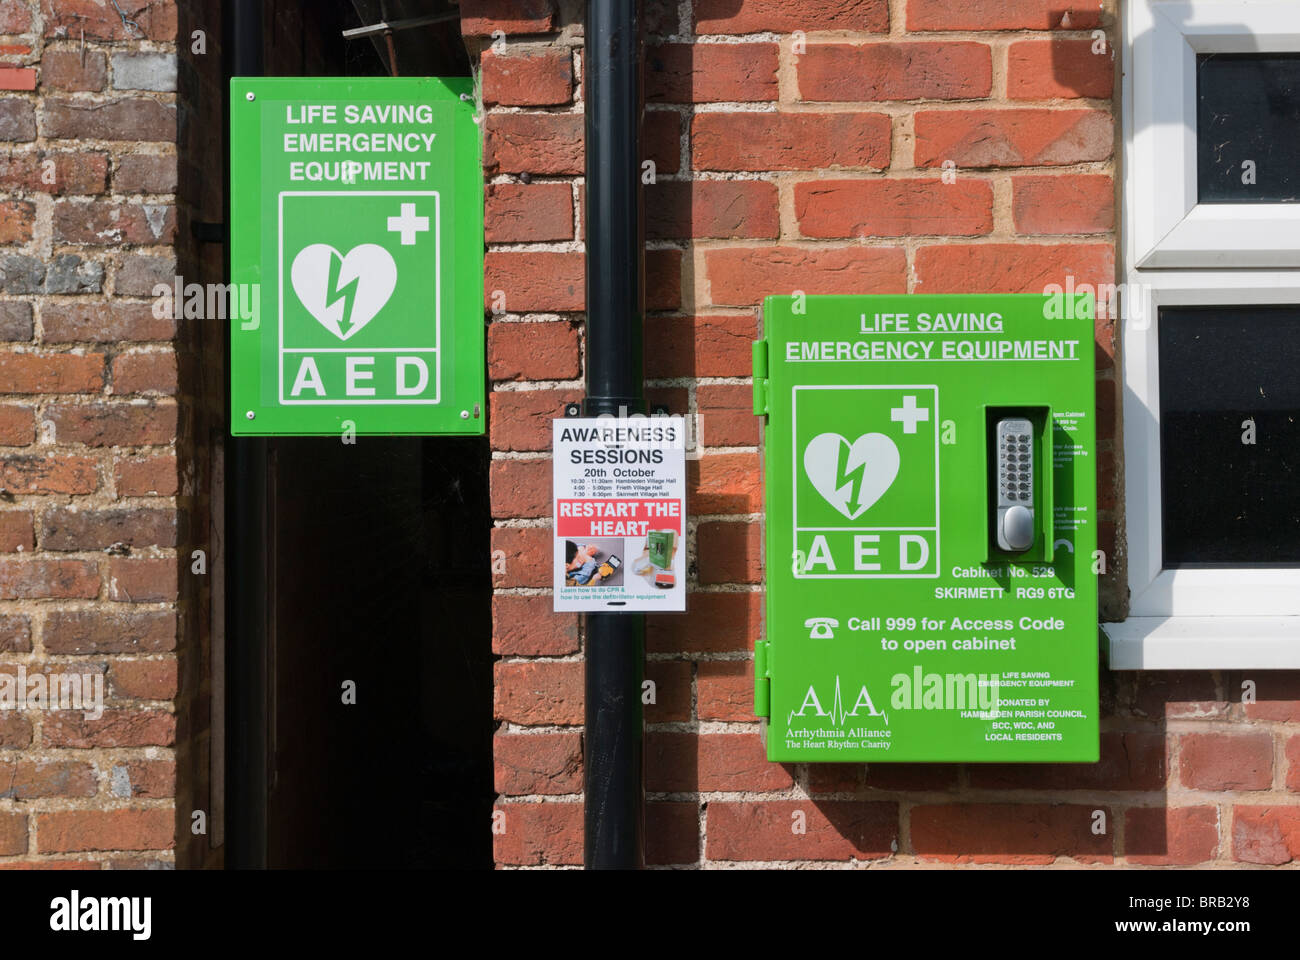 Automated External Defibrillator used to treat Heart Attacks in rural areas. This is at Skirmett, Buckinghamshire, England, UK Stock Photo